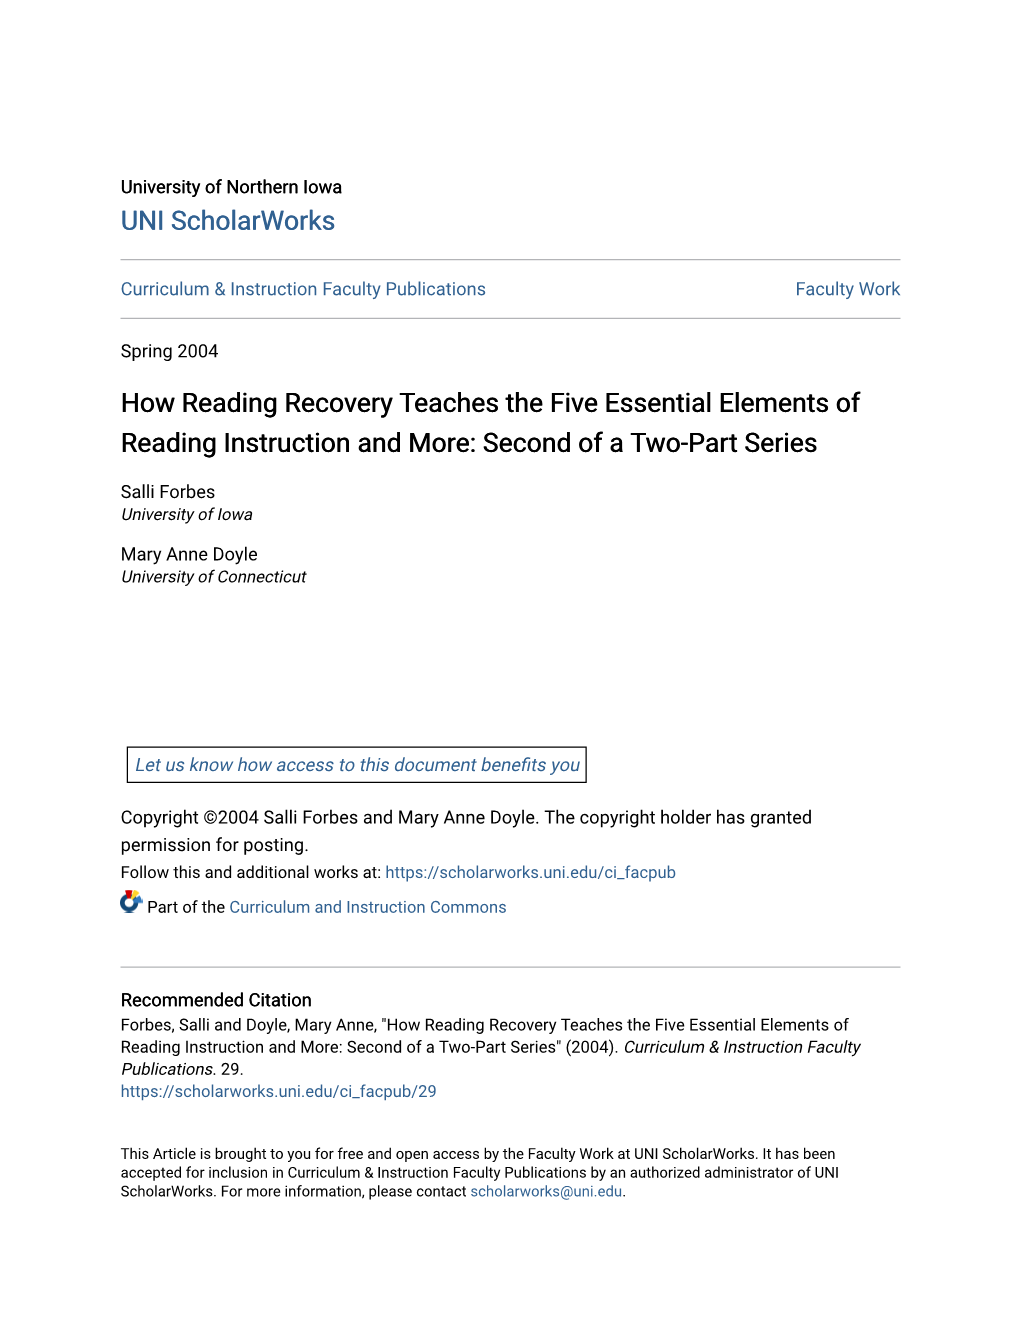 How Reading Recovery Teaches the Five Essential Elements of Reading Instruction and More: Second of a Two-Part Series